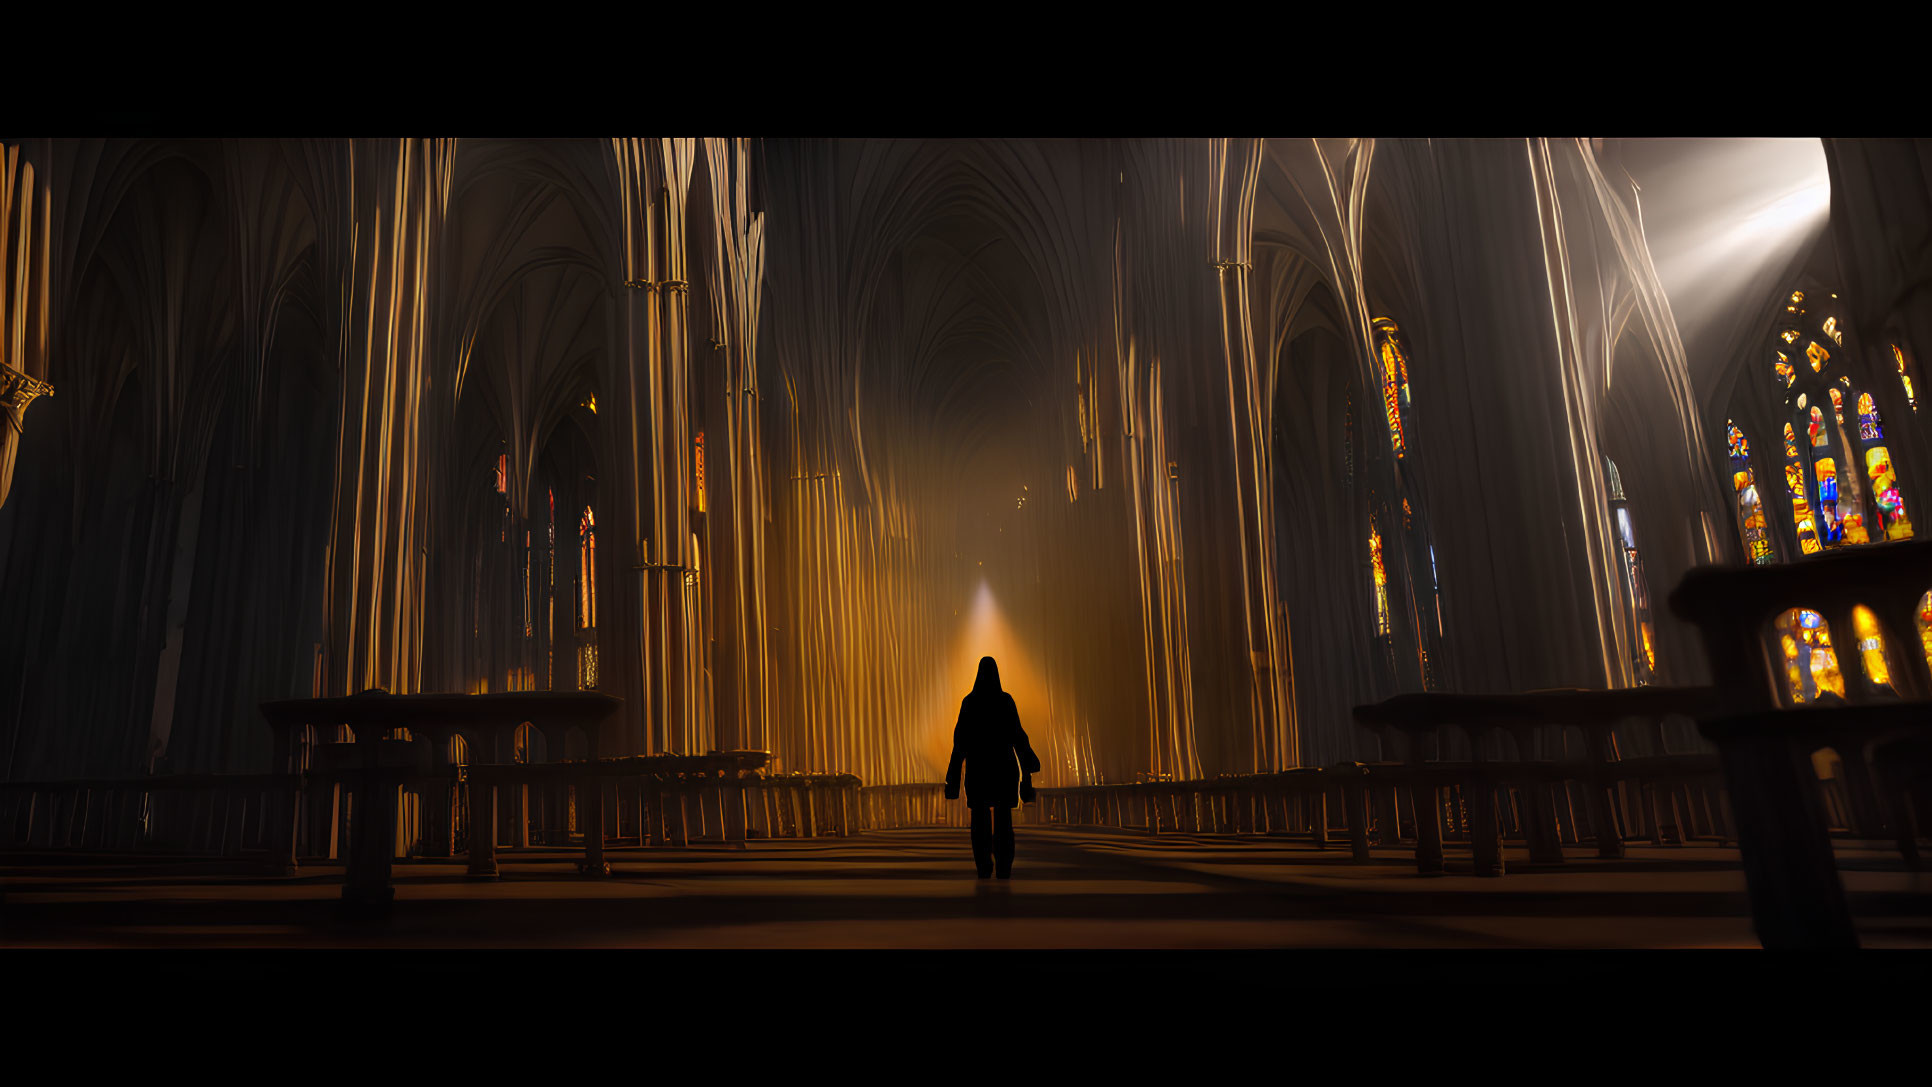 Solitary figure in grand Gothic cathedral with stained glass windows